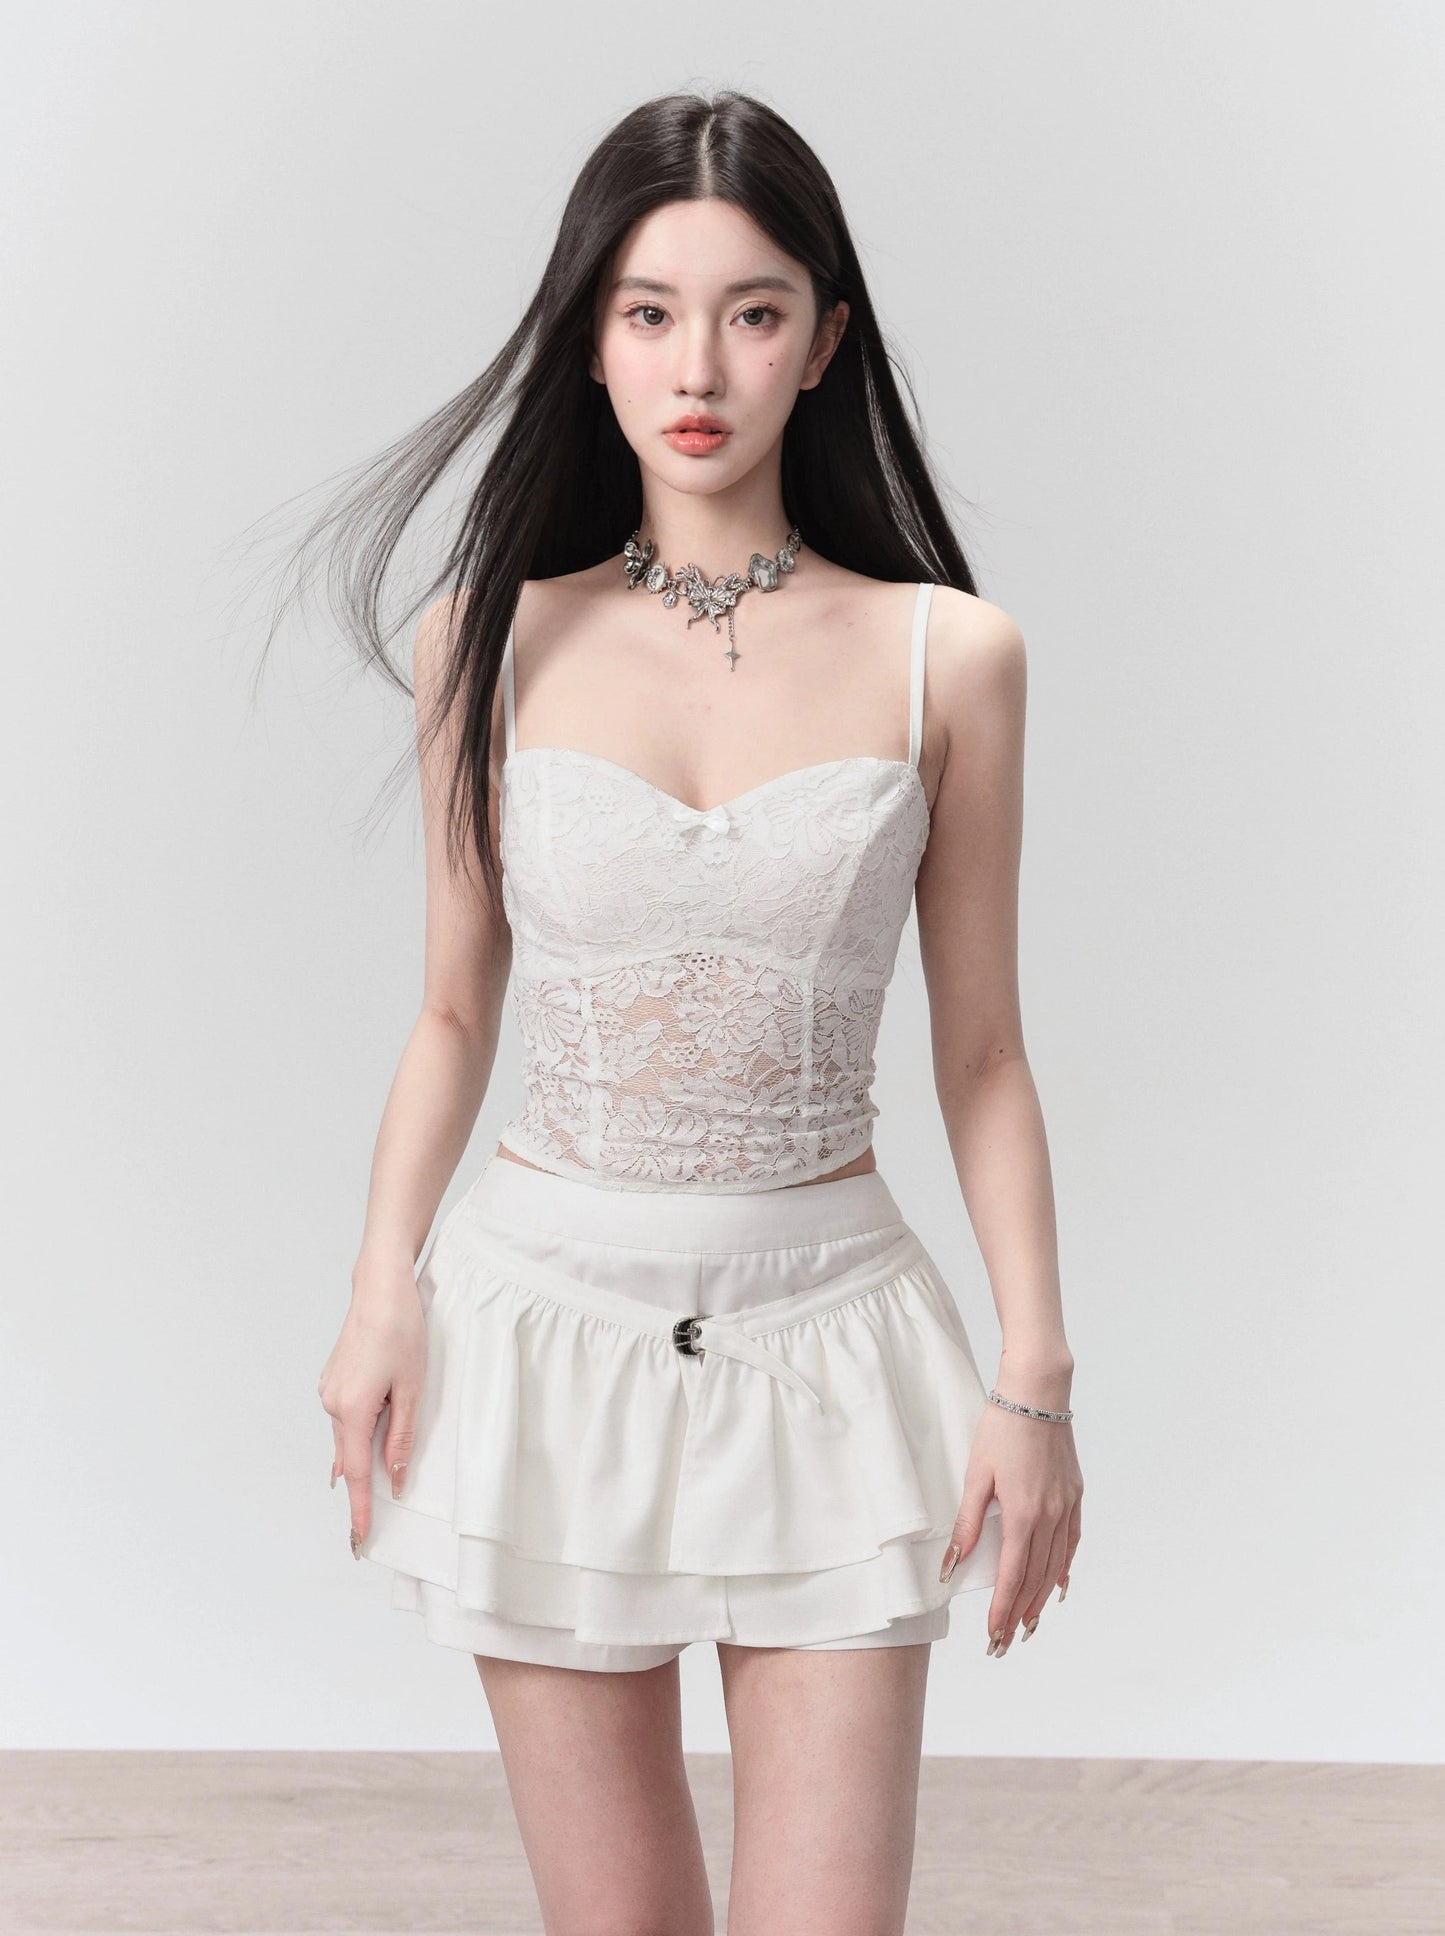 Fragileheart fragile shop do back to sentai pure desire cut-out lace strap embroidery shirt three-piece set